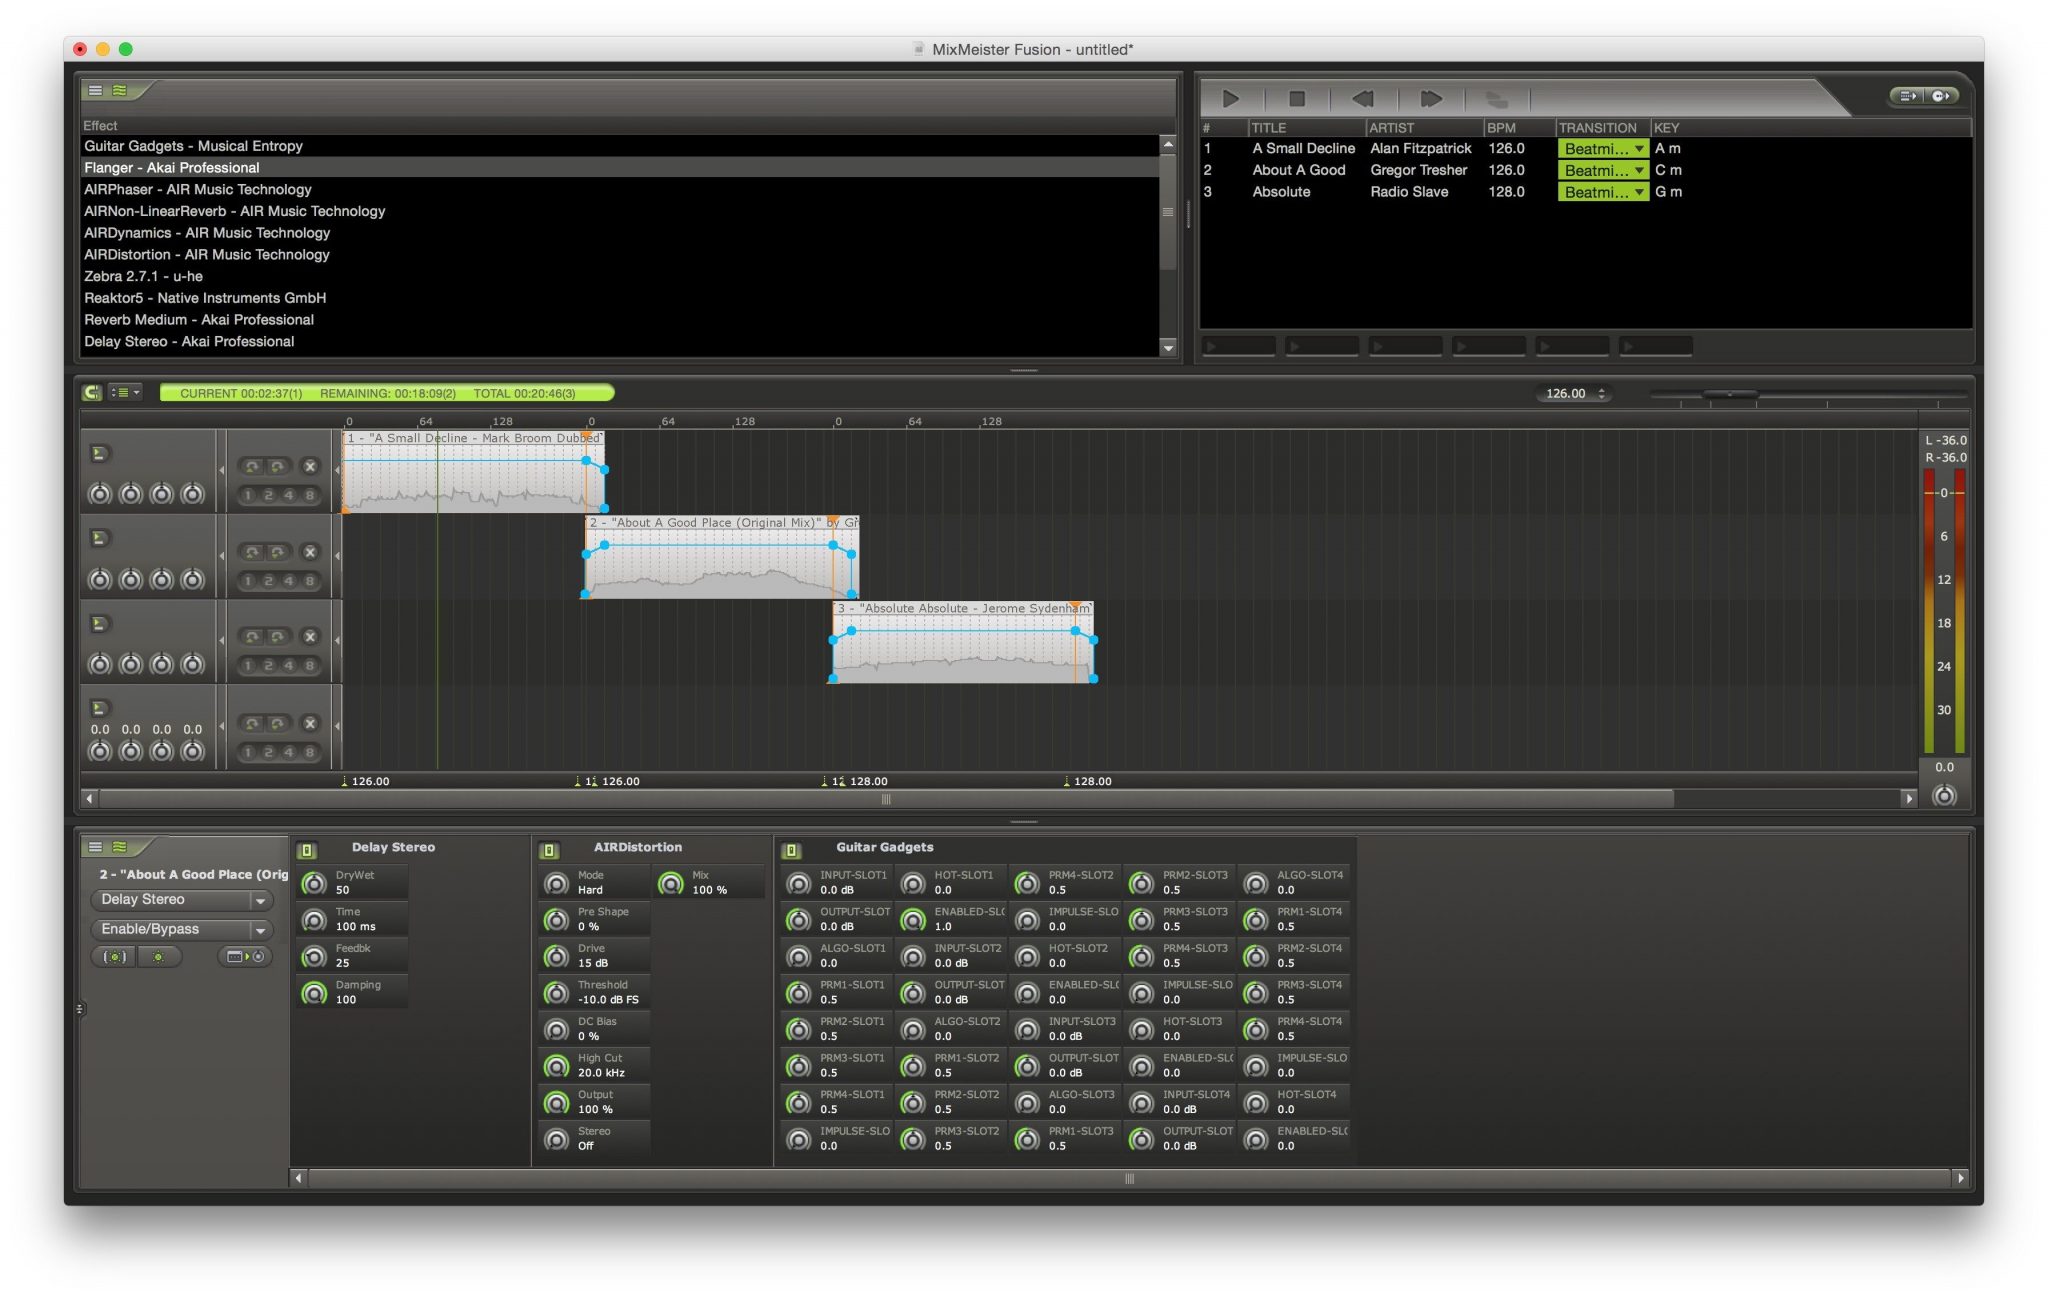 mixmeister fusion video 7.0.5.0